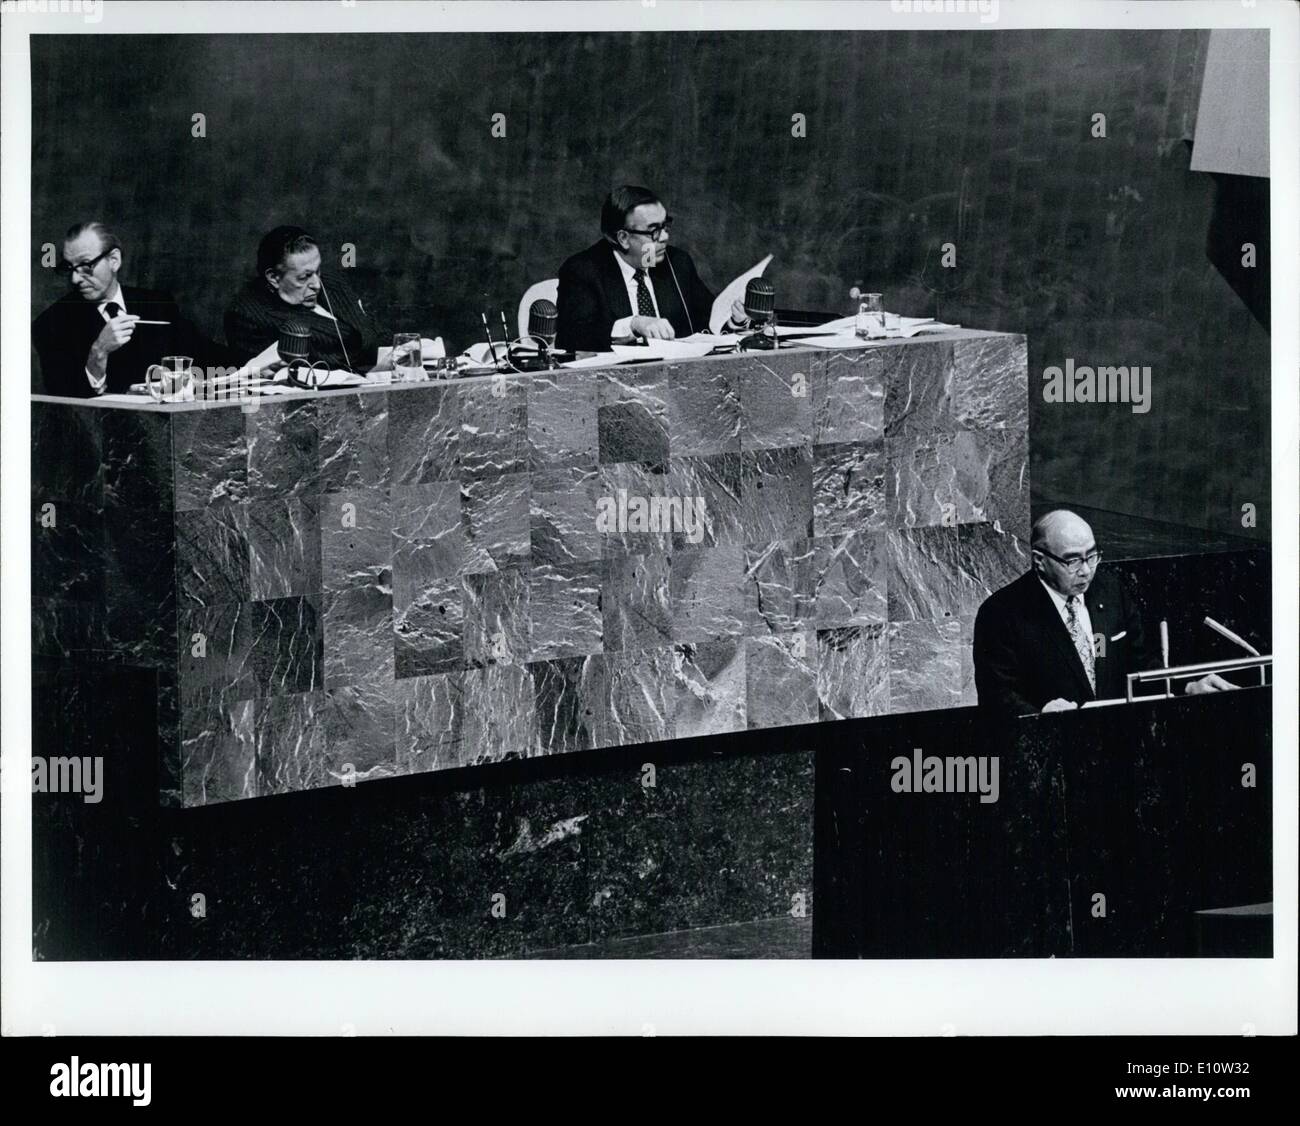 Apr. 04, 1974 - President of Gambia and seven other speakers address general assembly on problems of raw materials and development : The General Assembly continued this afternoon to hear policy statements from developed and developing countries on the problems of raw materials and development. The President of Gambia was the first speaker at the meeting, which was also addressed by the Foreign Ministers of Guina, Czechoslovakia, Canada, Zambia and Uruguay, the Trade Minister of New Zealand and a representative of Japan Stock Photo